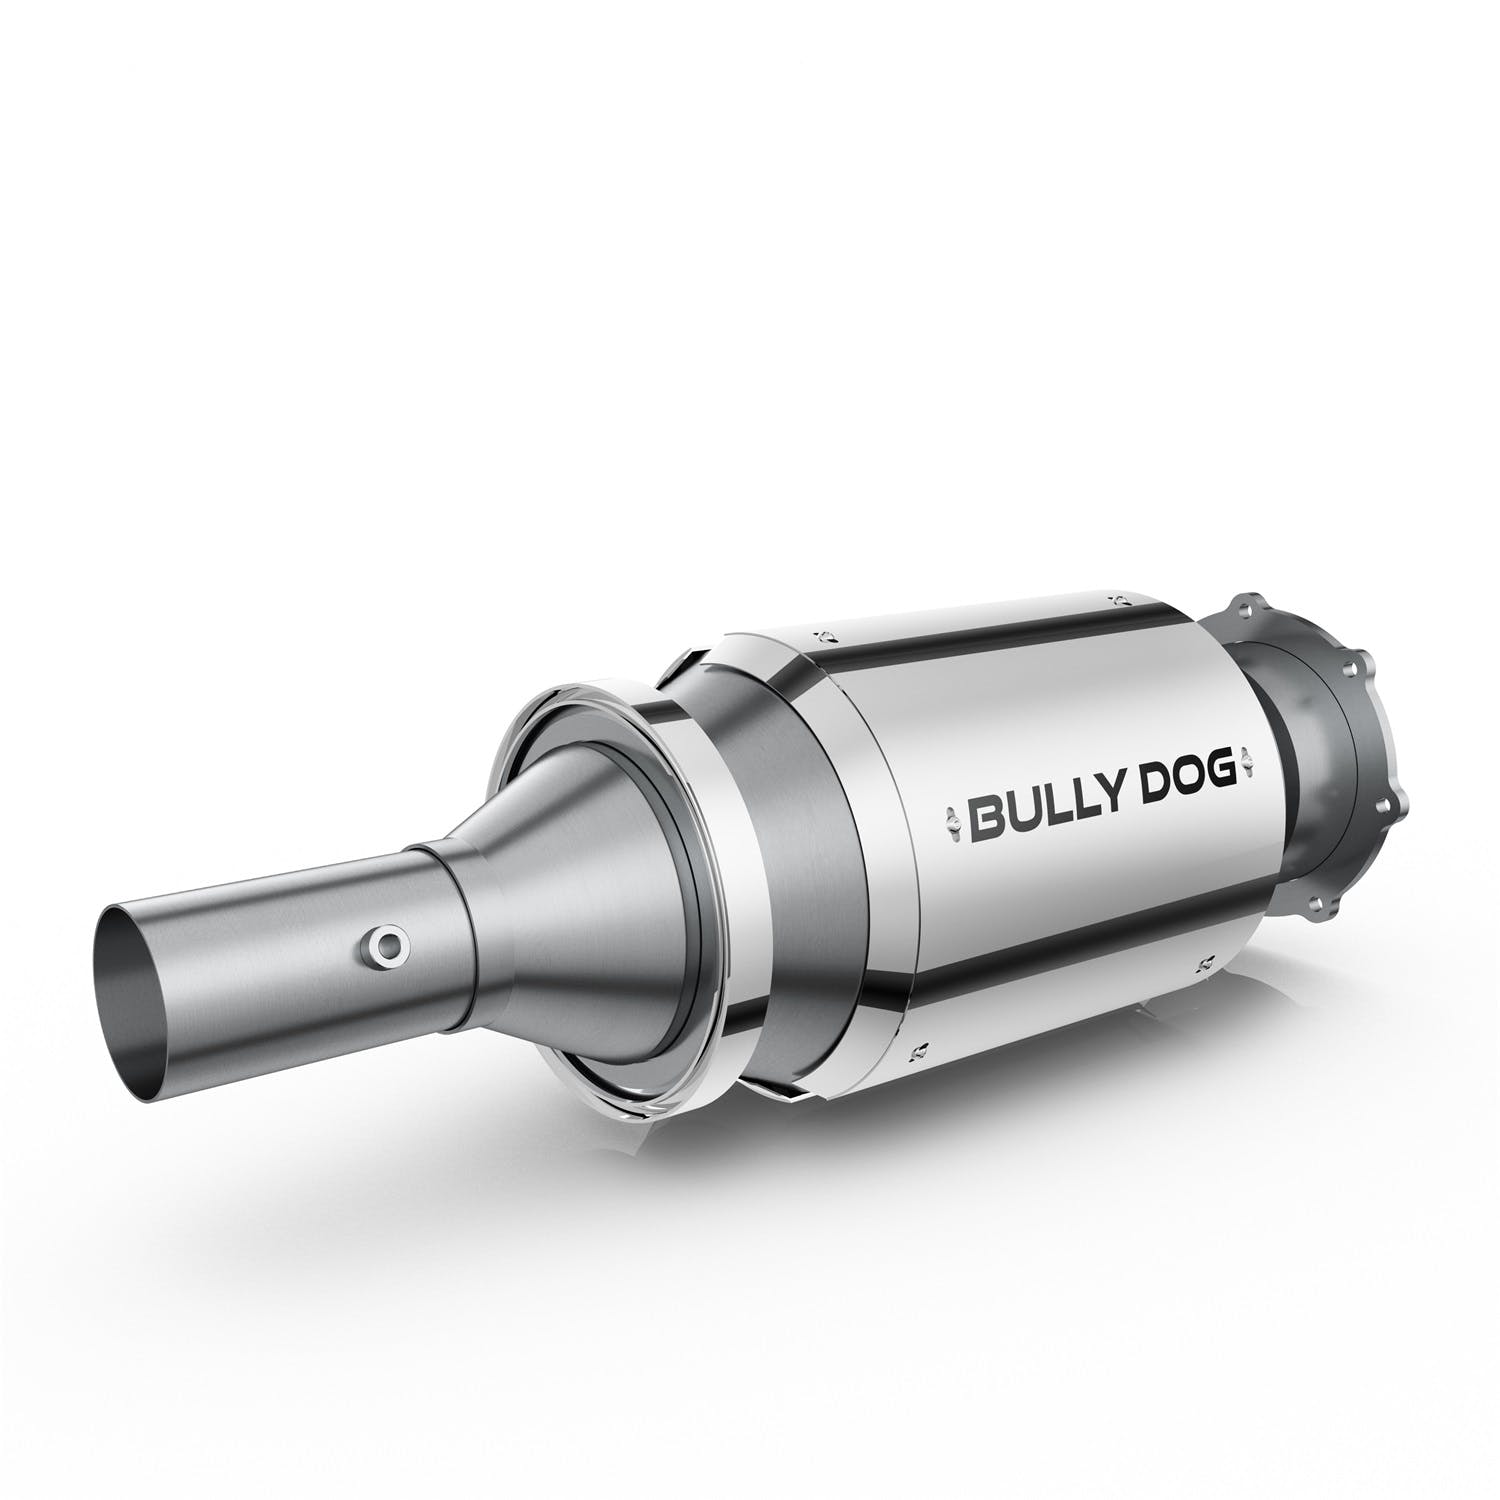 Bully Dog 70020 Diesel Particulate Filter. High-quality stainless steel DPF